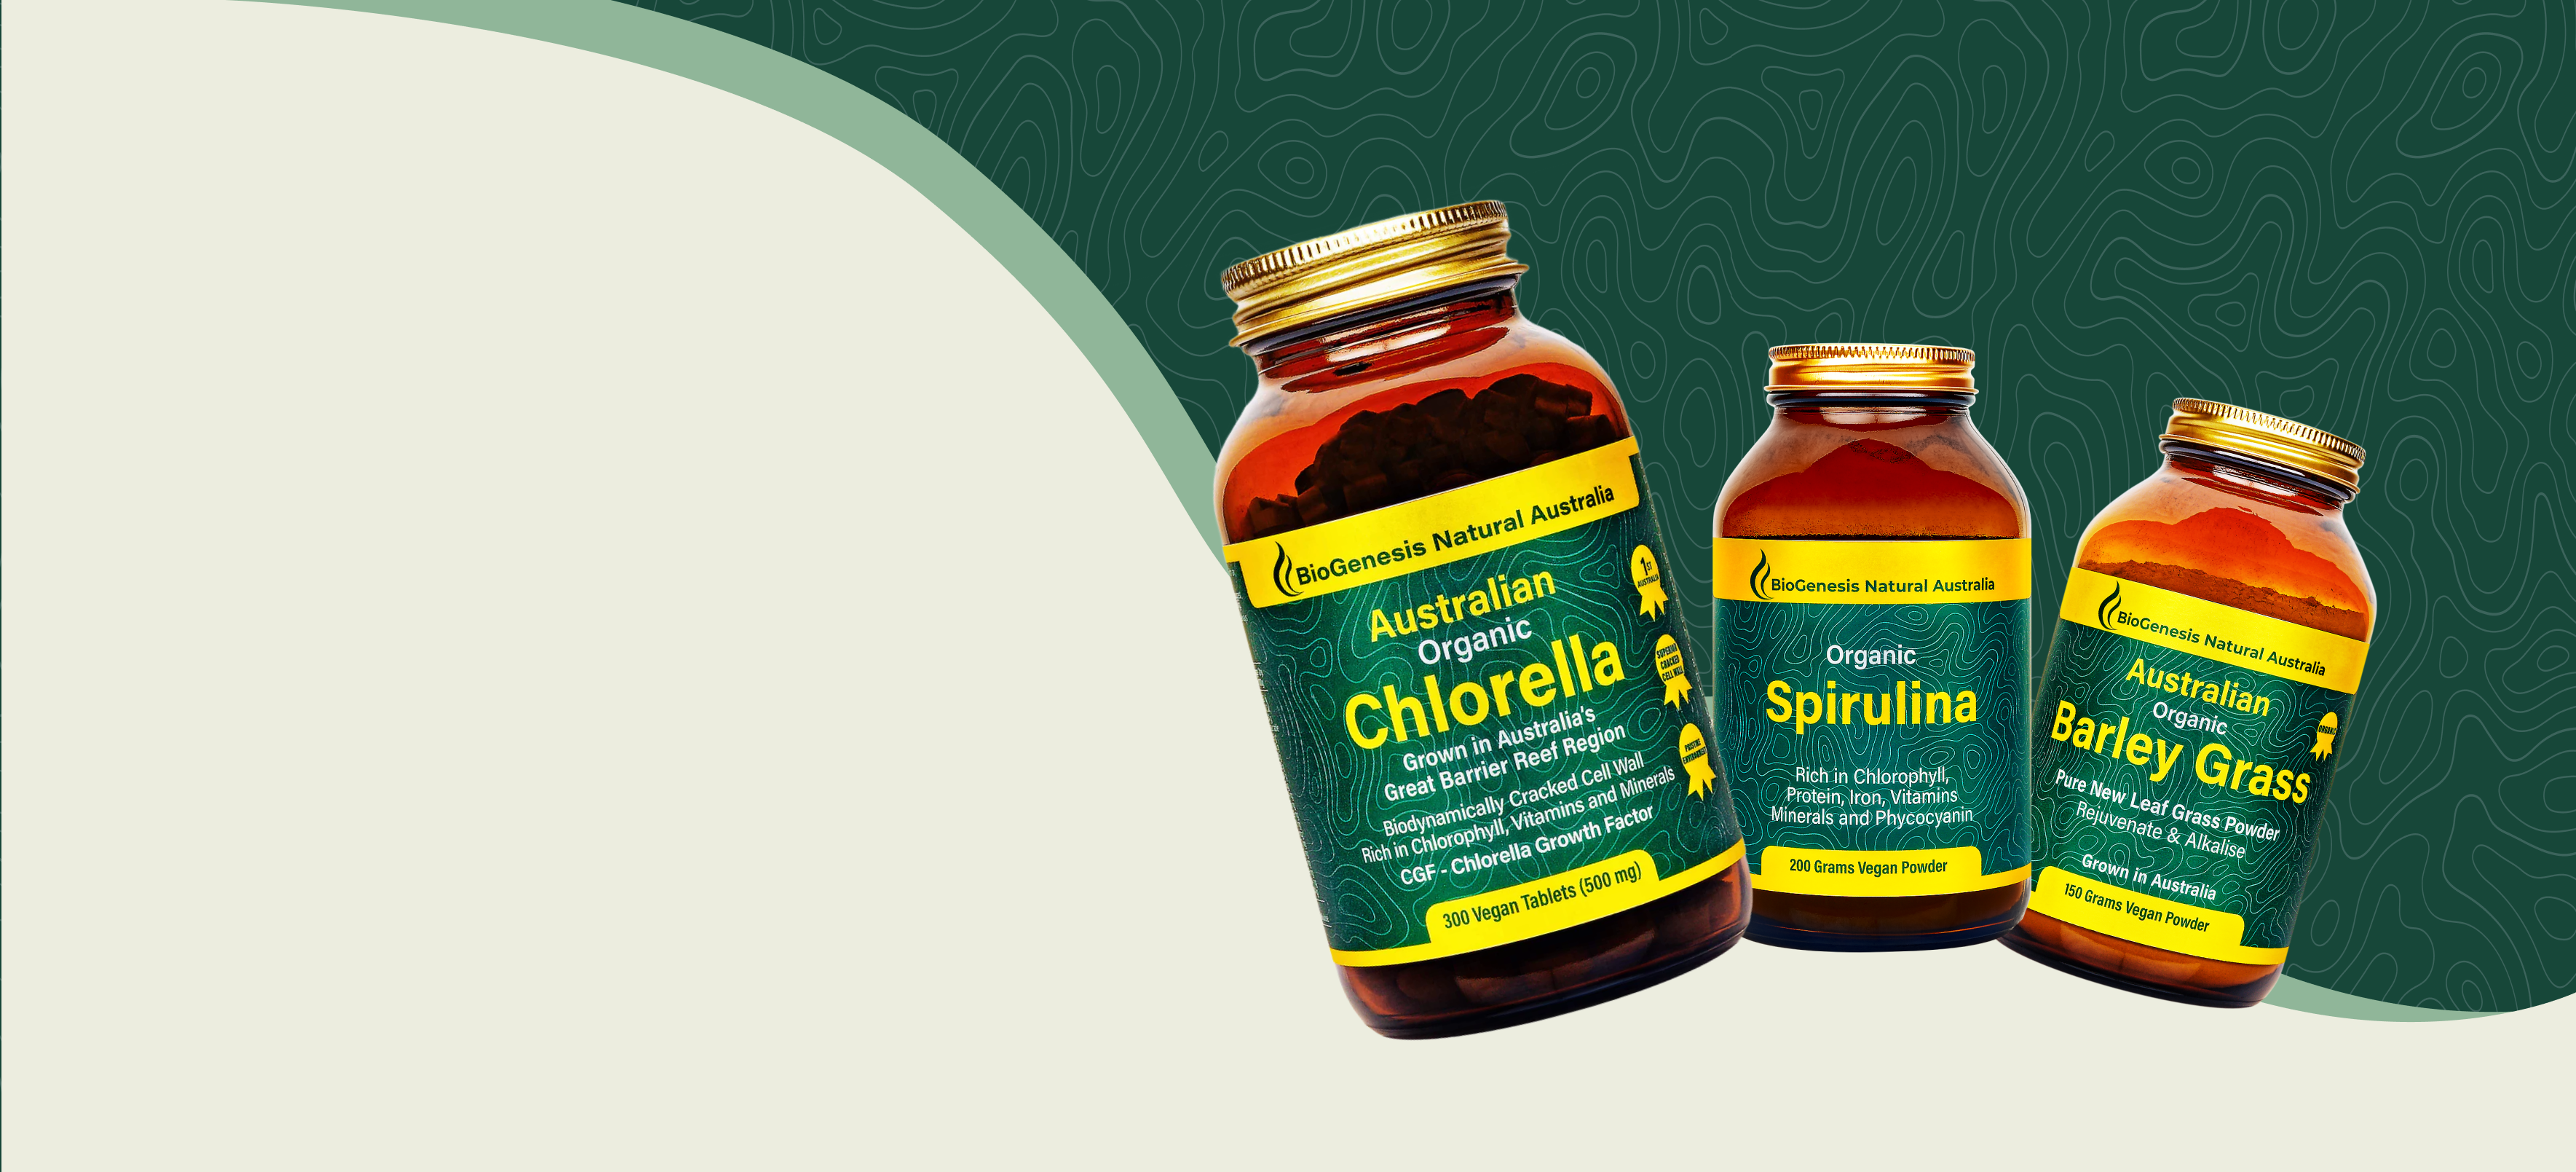 Chlorella, Spirulina and Barley grass jar shots - fanned out, positioned on the right of the image on a pattern background.